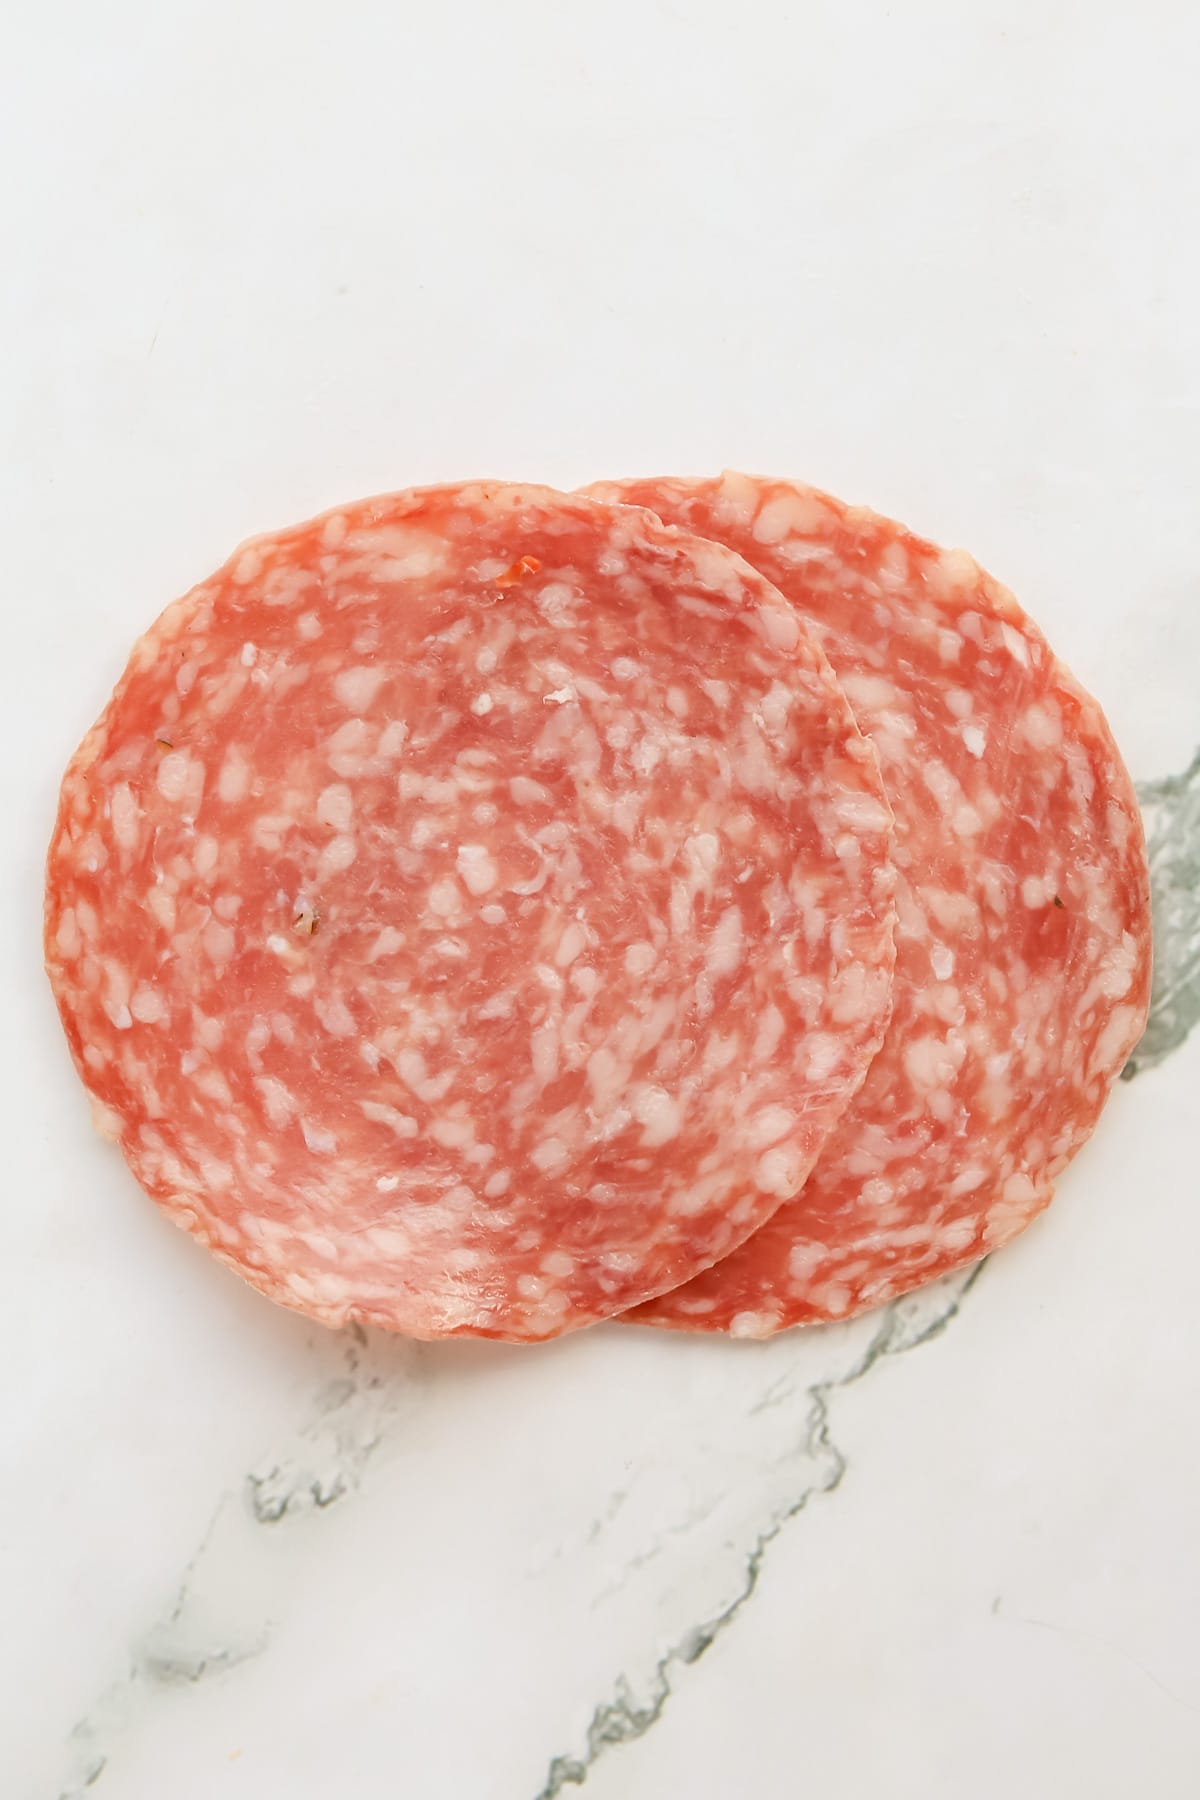 Two pieces of salami on countertop overlapping by an inch